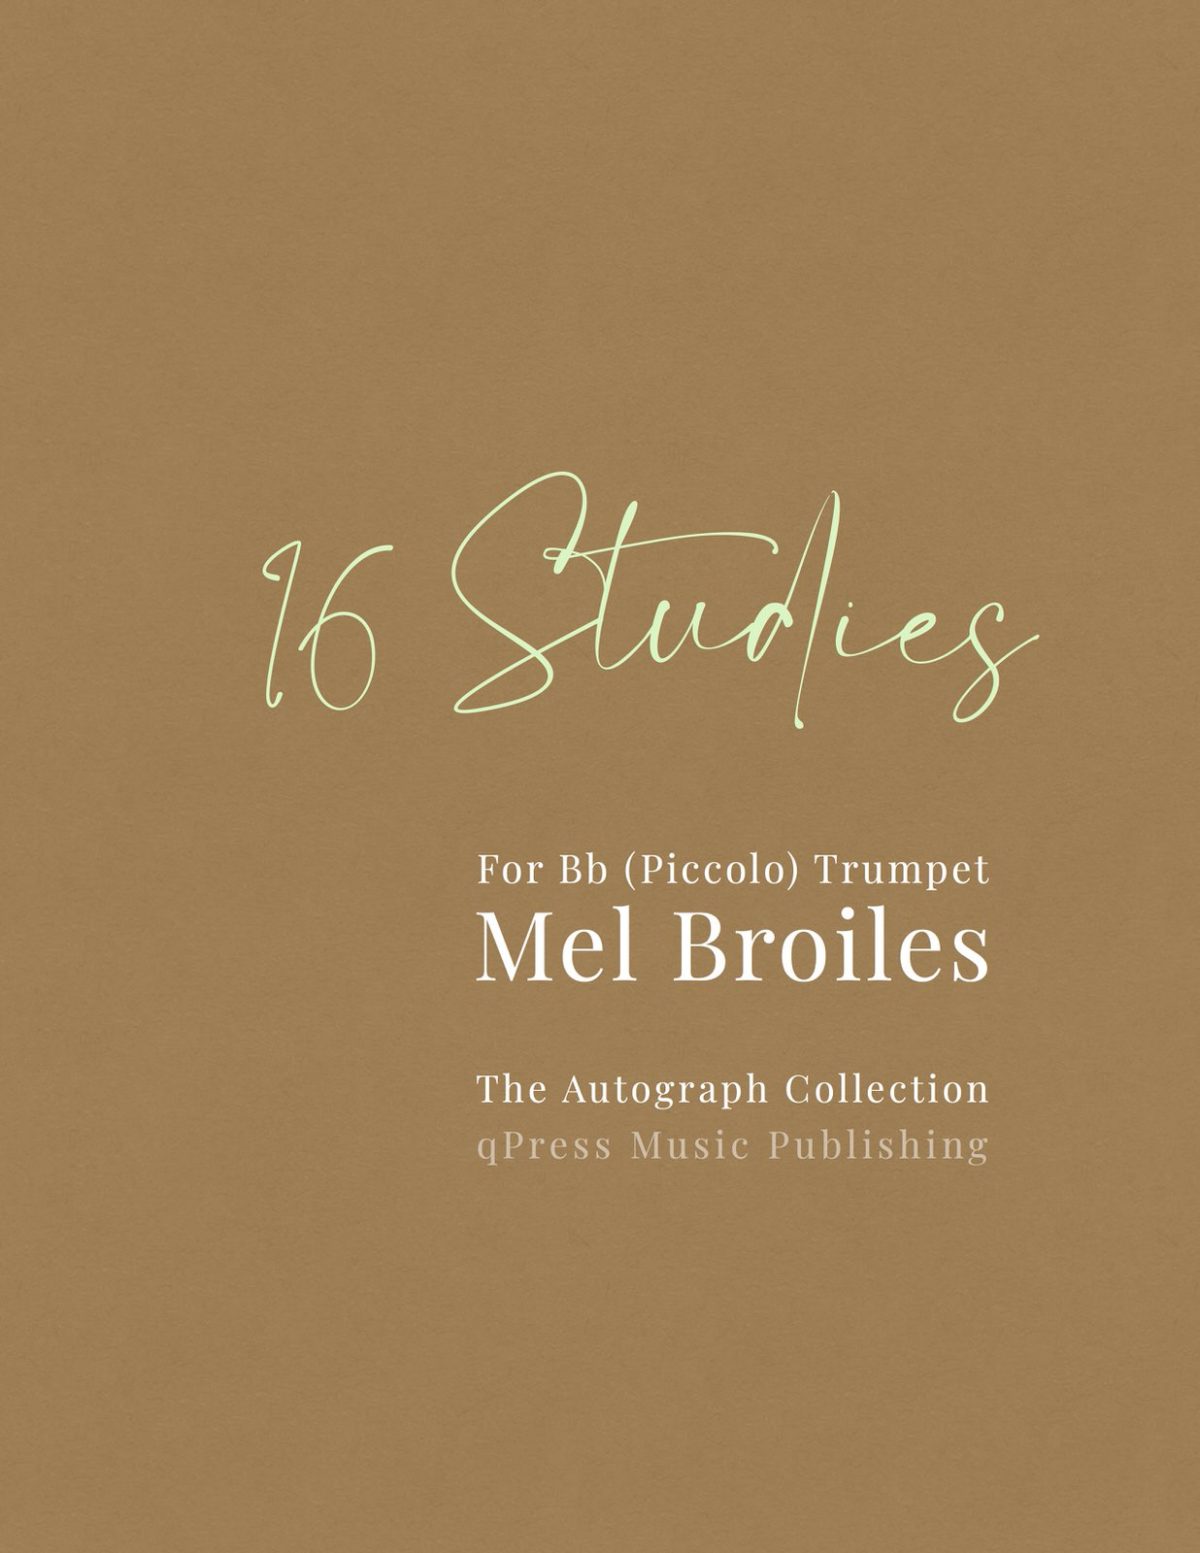 Broiles, 16 Studies for Piccolo Trumpet-p01